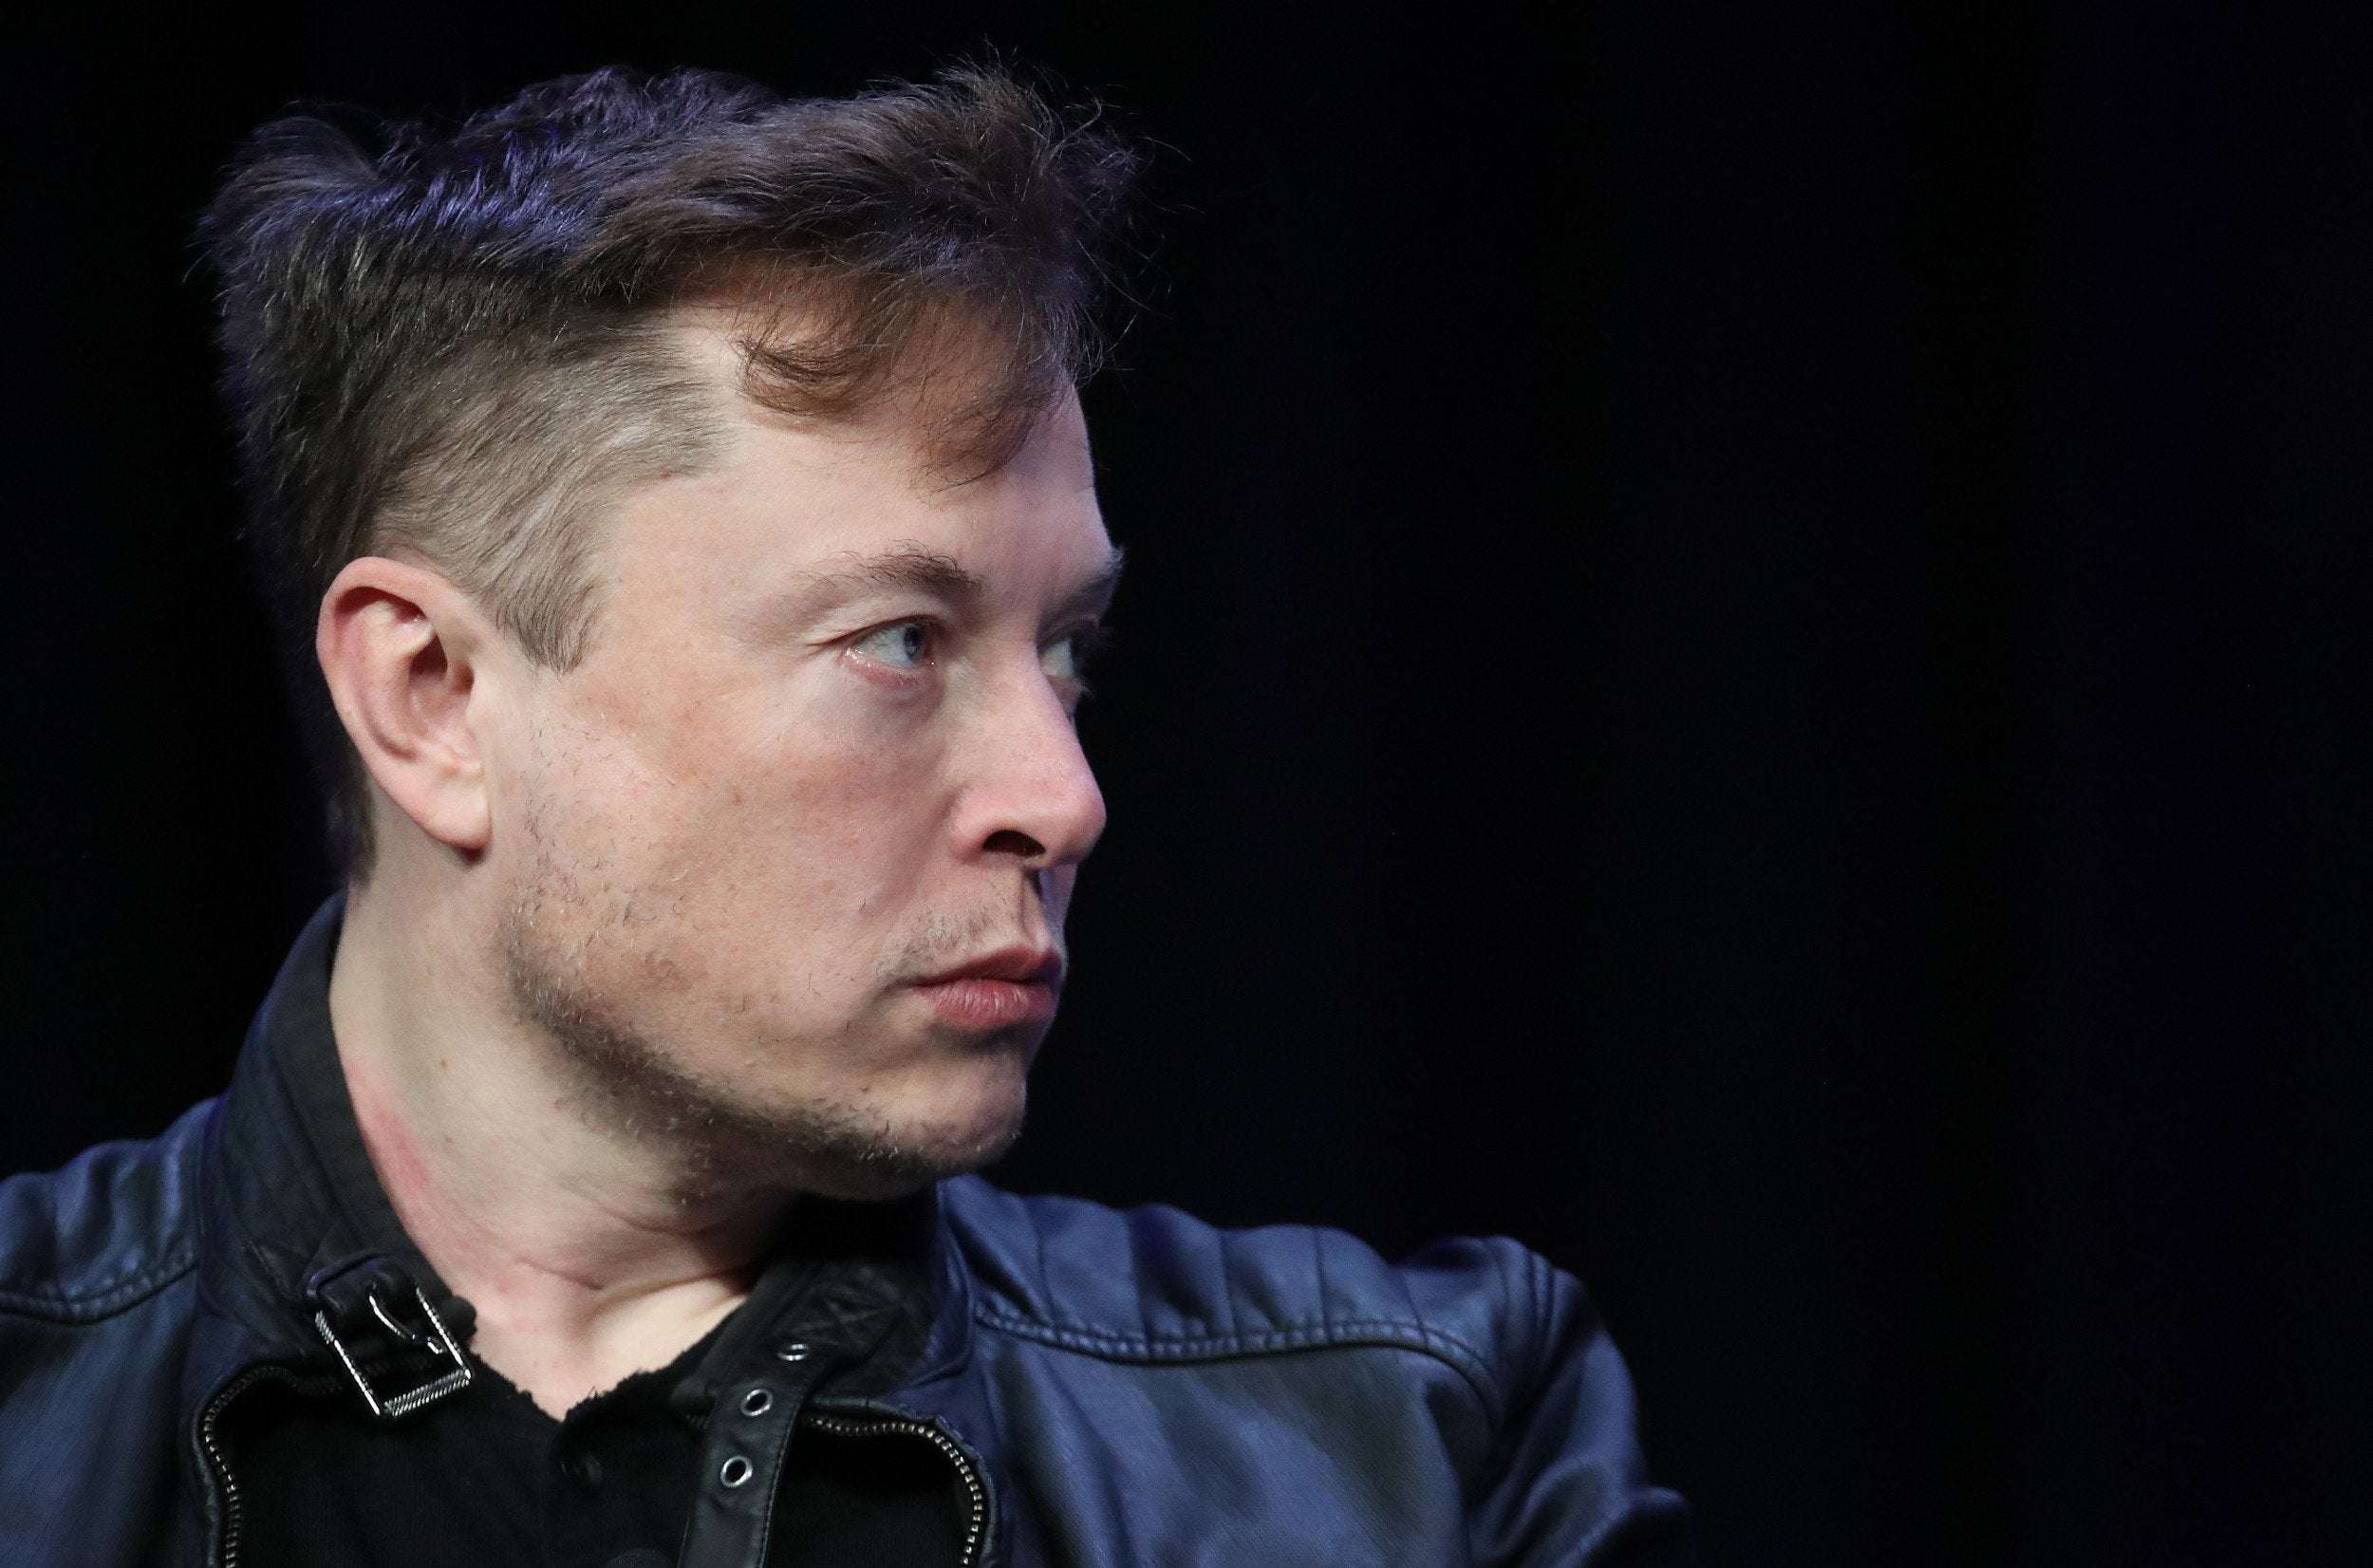 image for Elon Musk Defends Sending 'Non-Invasive' Ventilators to Hospitals, Says Criticism is from 'Bot Accounts'